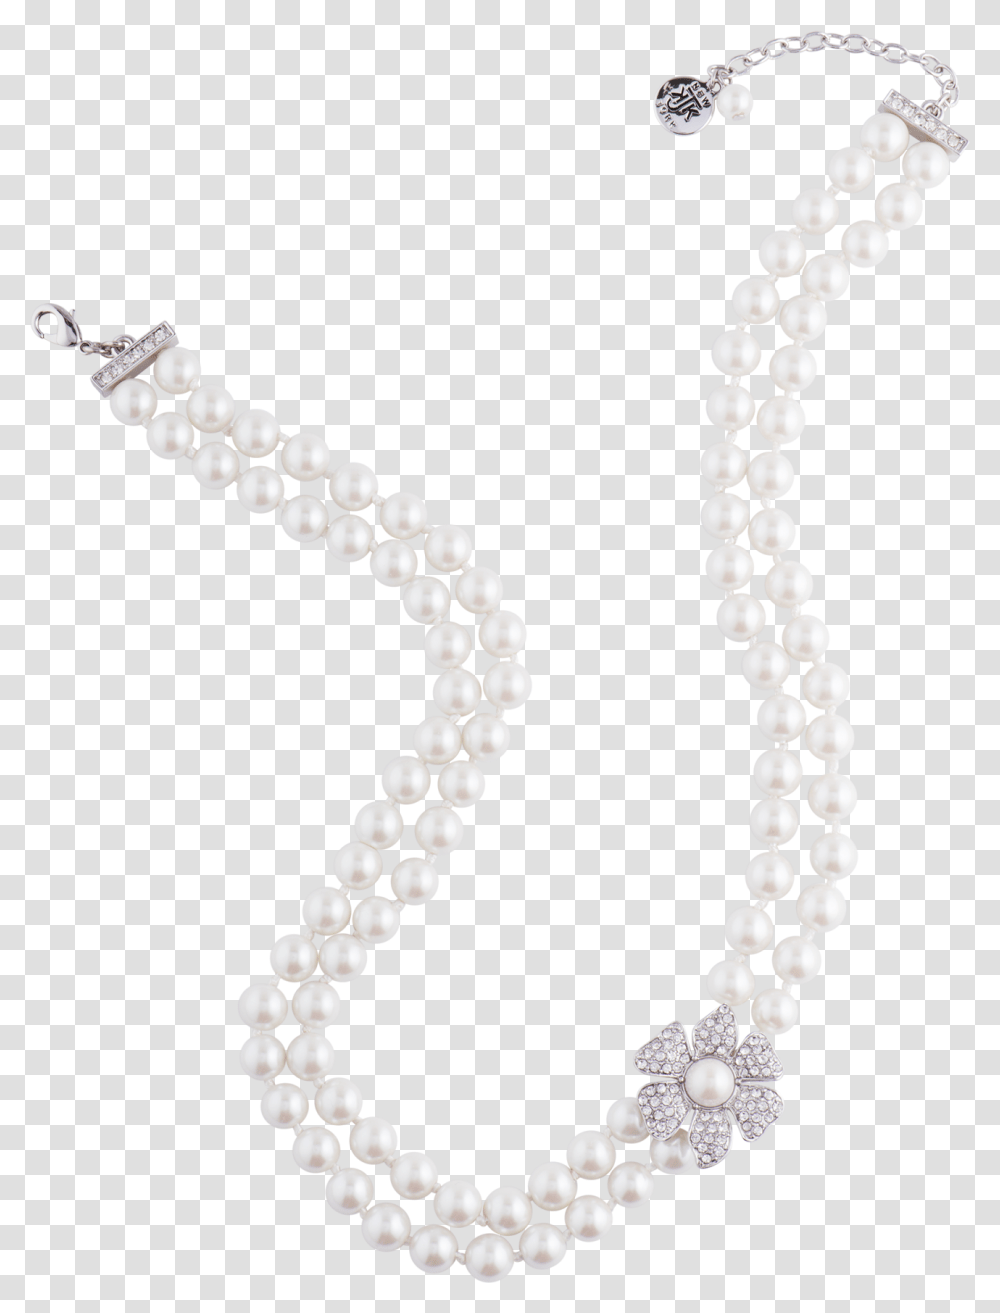 Necklace, Accessories, Accessory, Bead, Bead Necklace Transparent Png